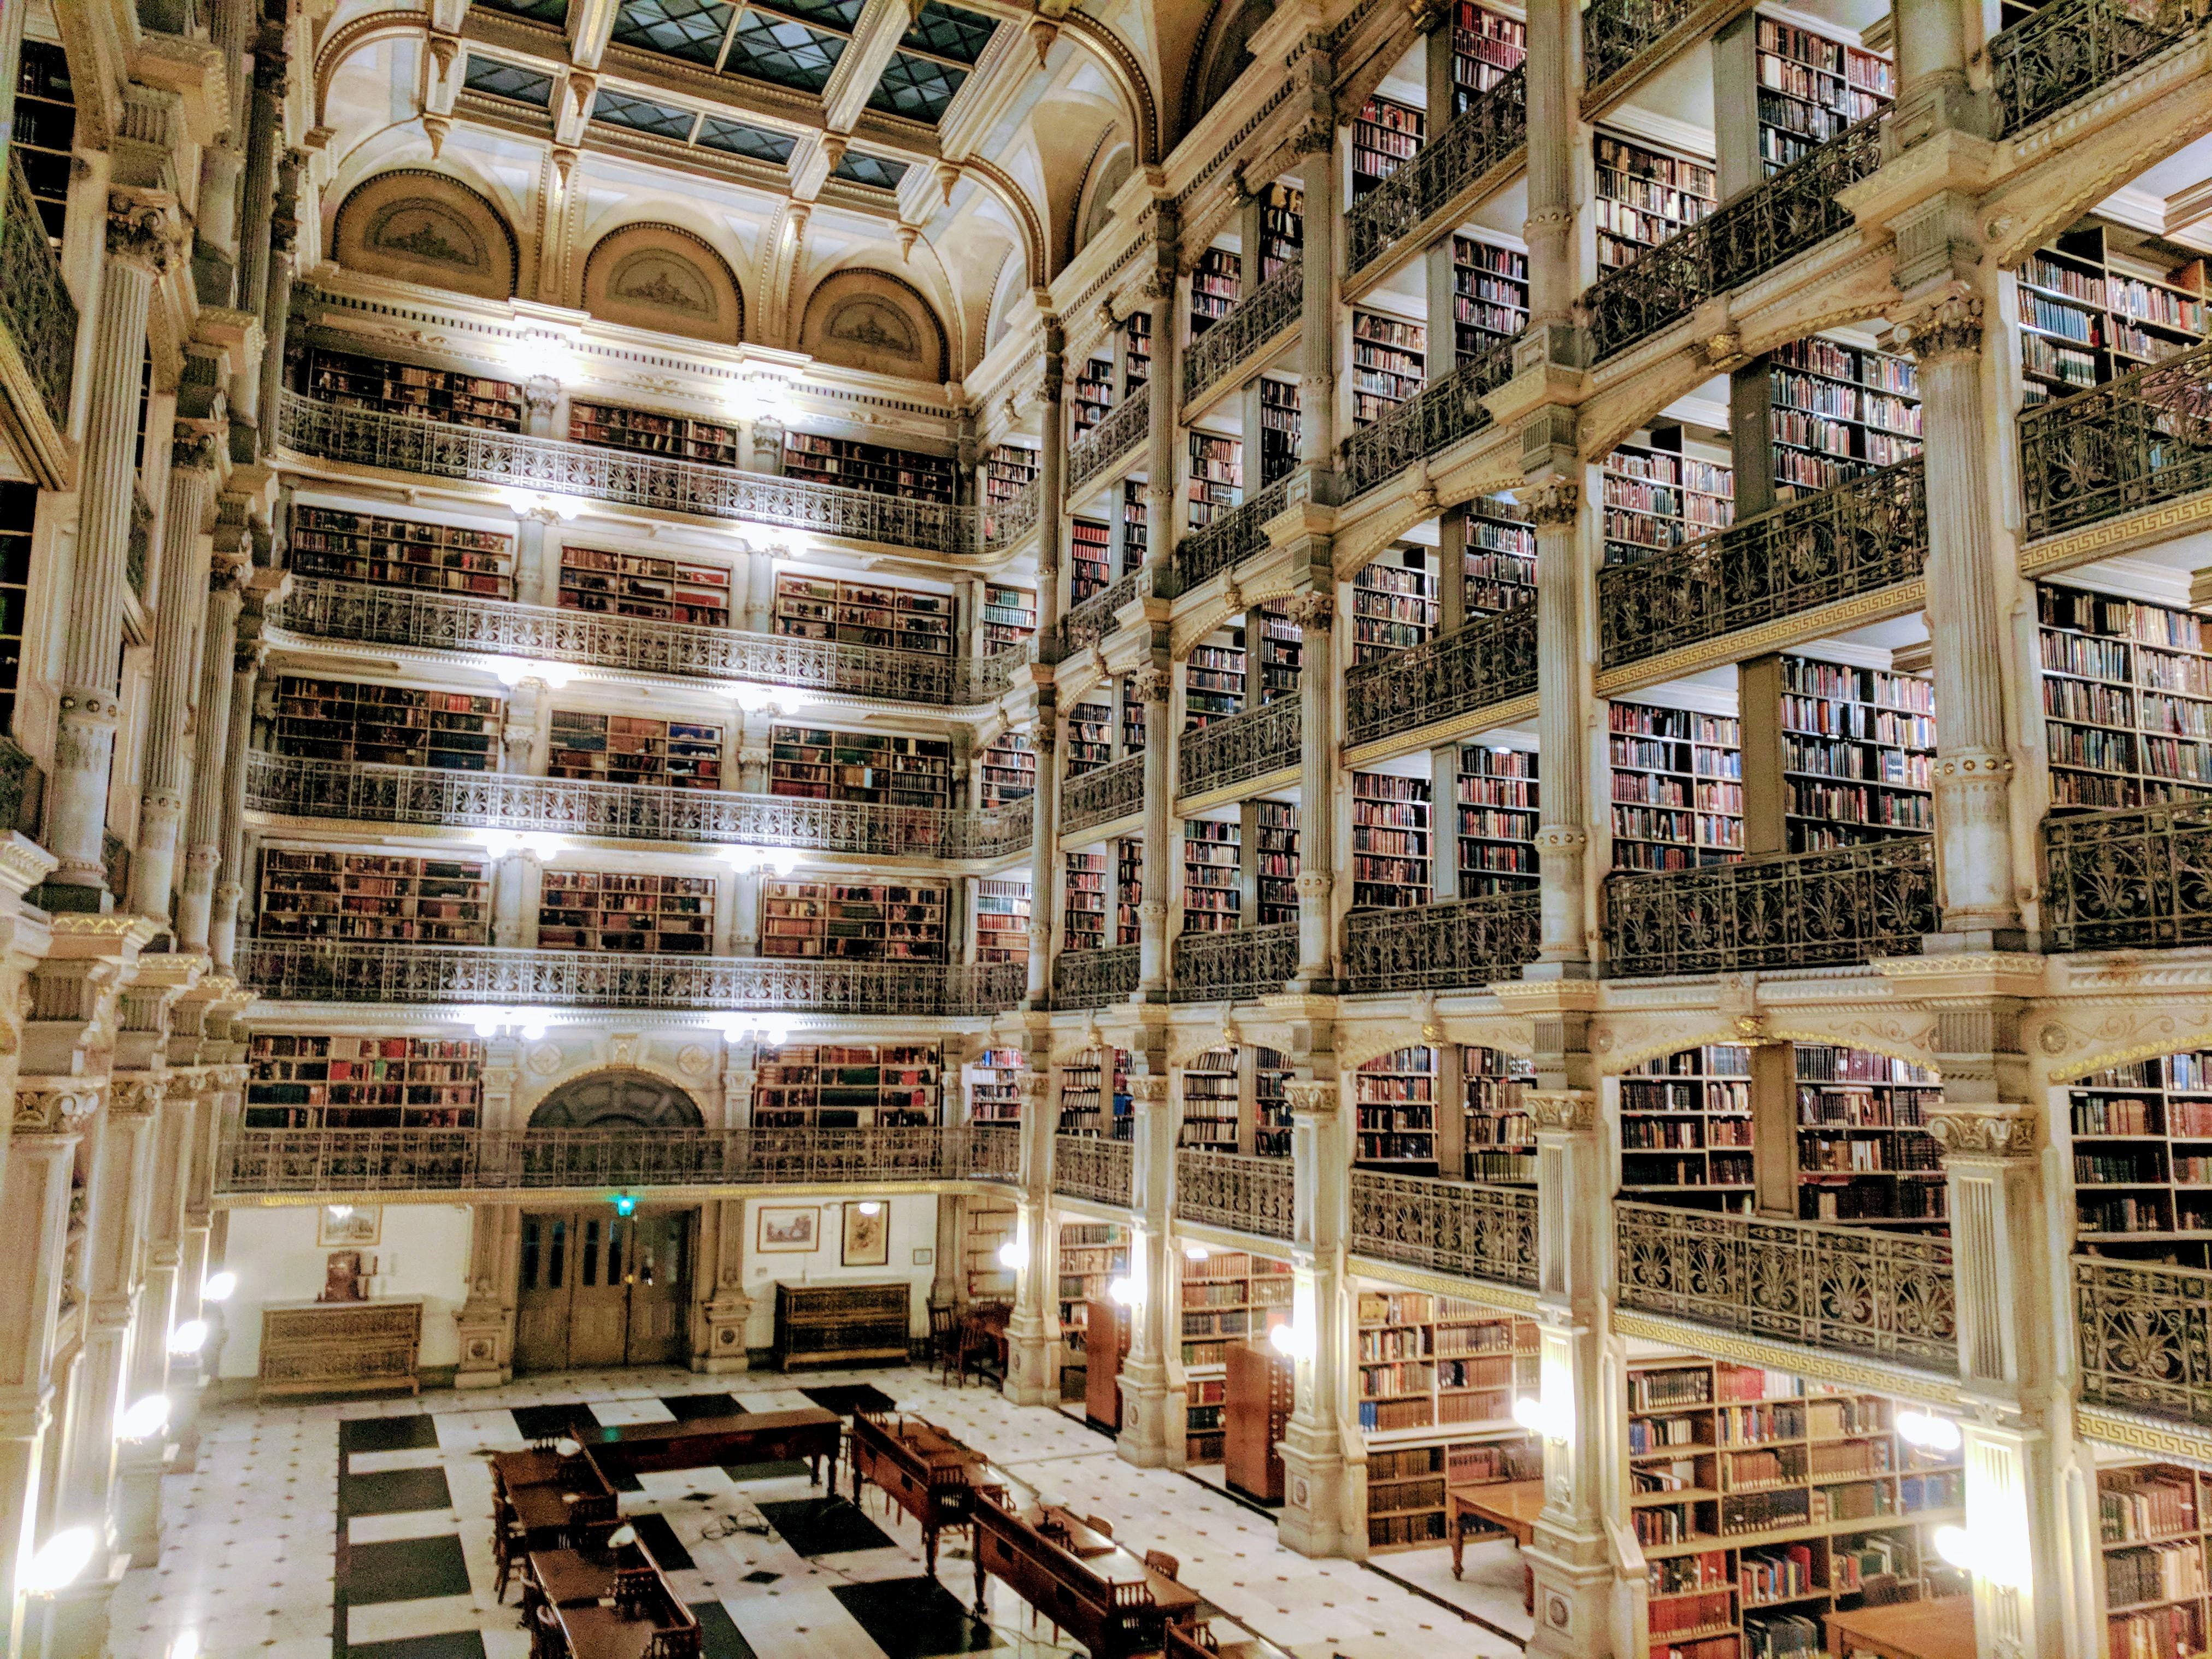 The George Peabody Library 